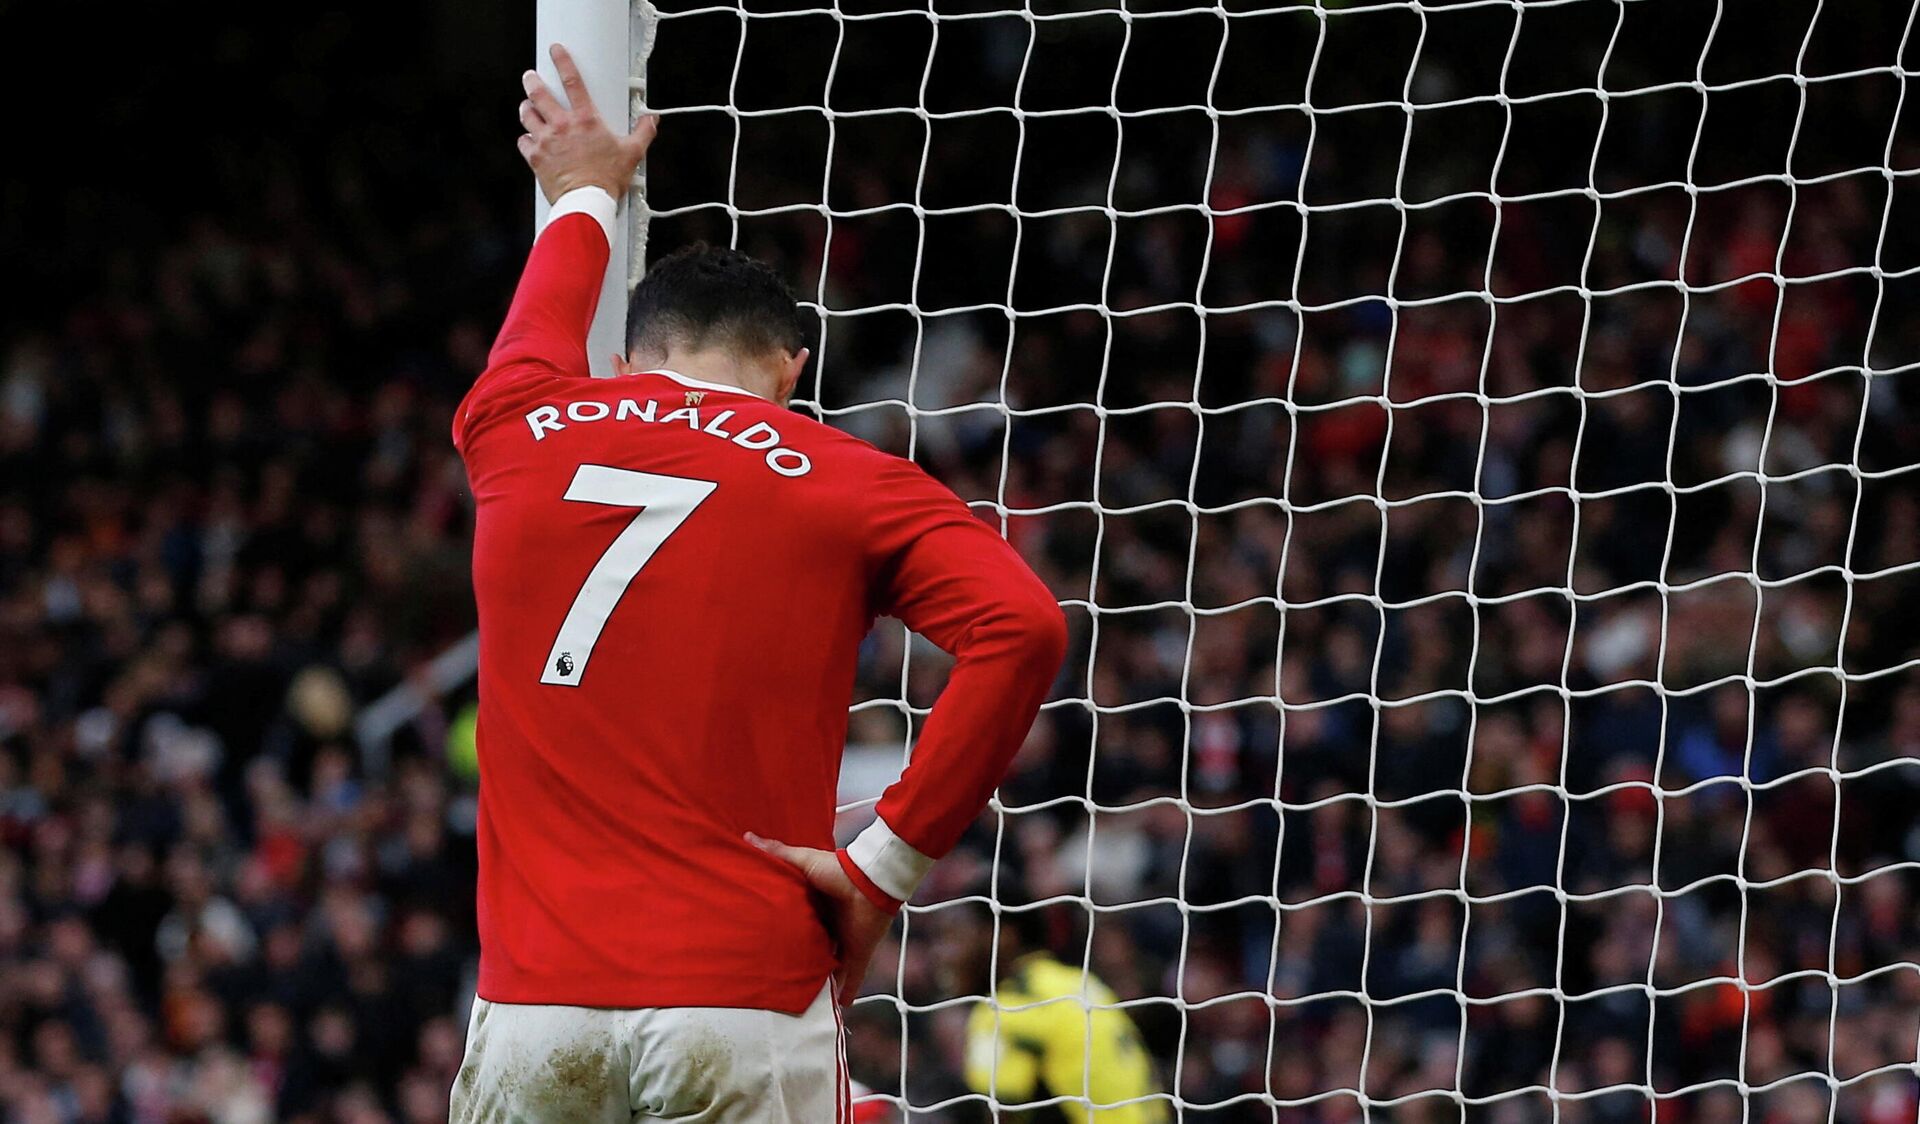 Soccer Football - Premier League - Manchester United v Watford - Old Trafford, Manchester, Britain - February 26, 2022 Manchester United's Cristiano Ronaldo reacts after missing a chance to score - Sputnik International, 1920, 07.03.2022